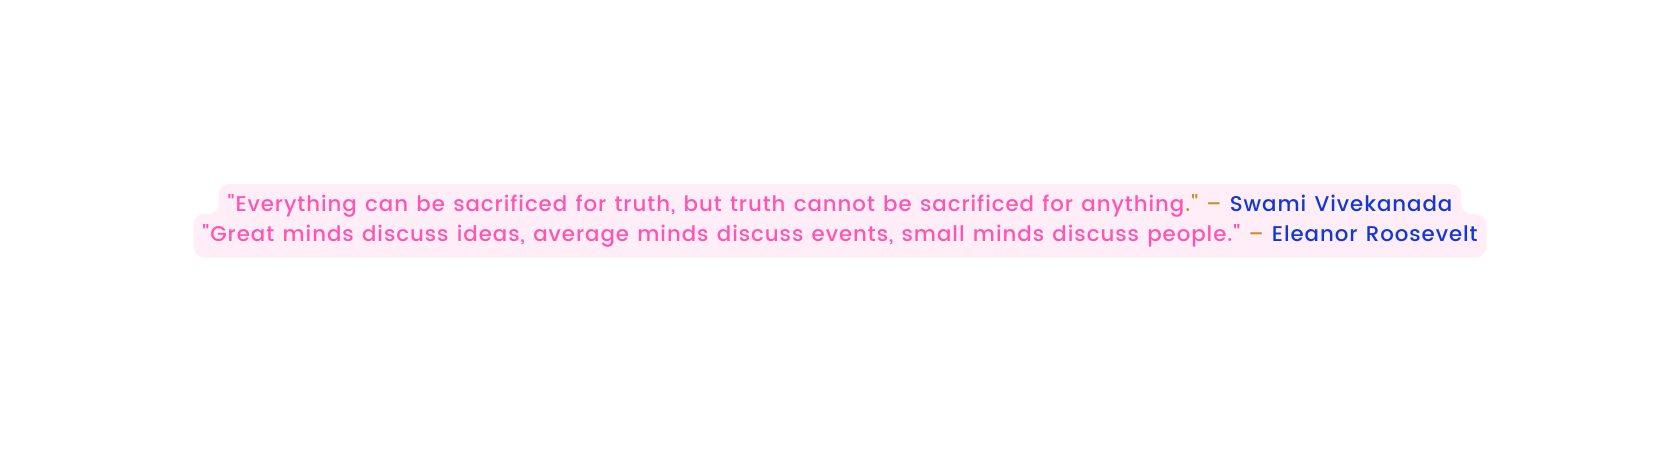 Everything can be sacrificed for truth but truth cannot be sacrificed for anything Swami Vivekanada Great minds discuss ideas average minds discuss events small minds discuss people Eleanor Roosevelt